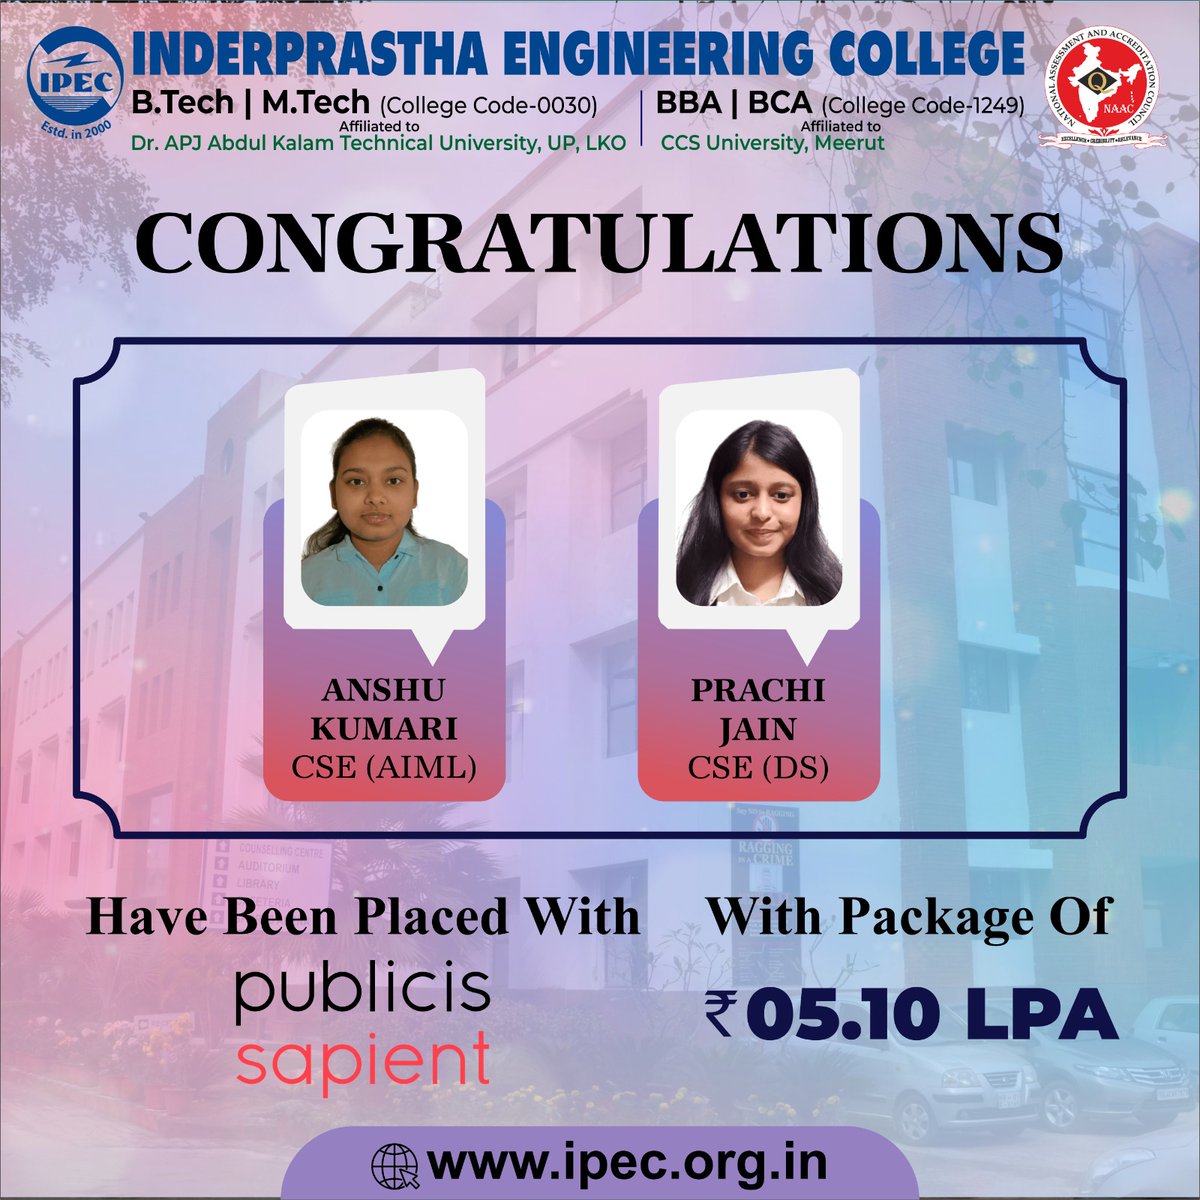 Congratulations!!!

Inderprastha Engineering College, Ghaziabad, is #proud to announce the placement of two #students in Publicis Sapient with a package of 5.10 LPA.

IPEC wishes all the best for their future endeavours.

#ipec  #AICTE #bestcollege #aktu #ipec30 #btech #cse #it